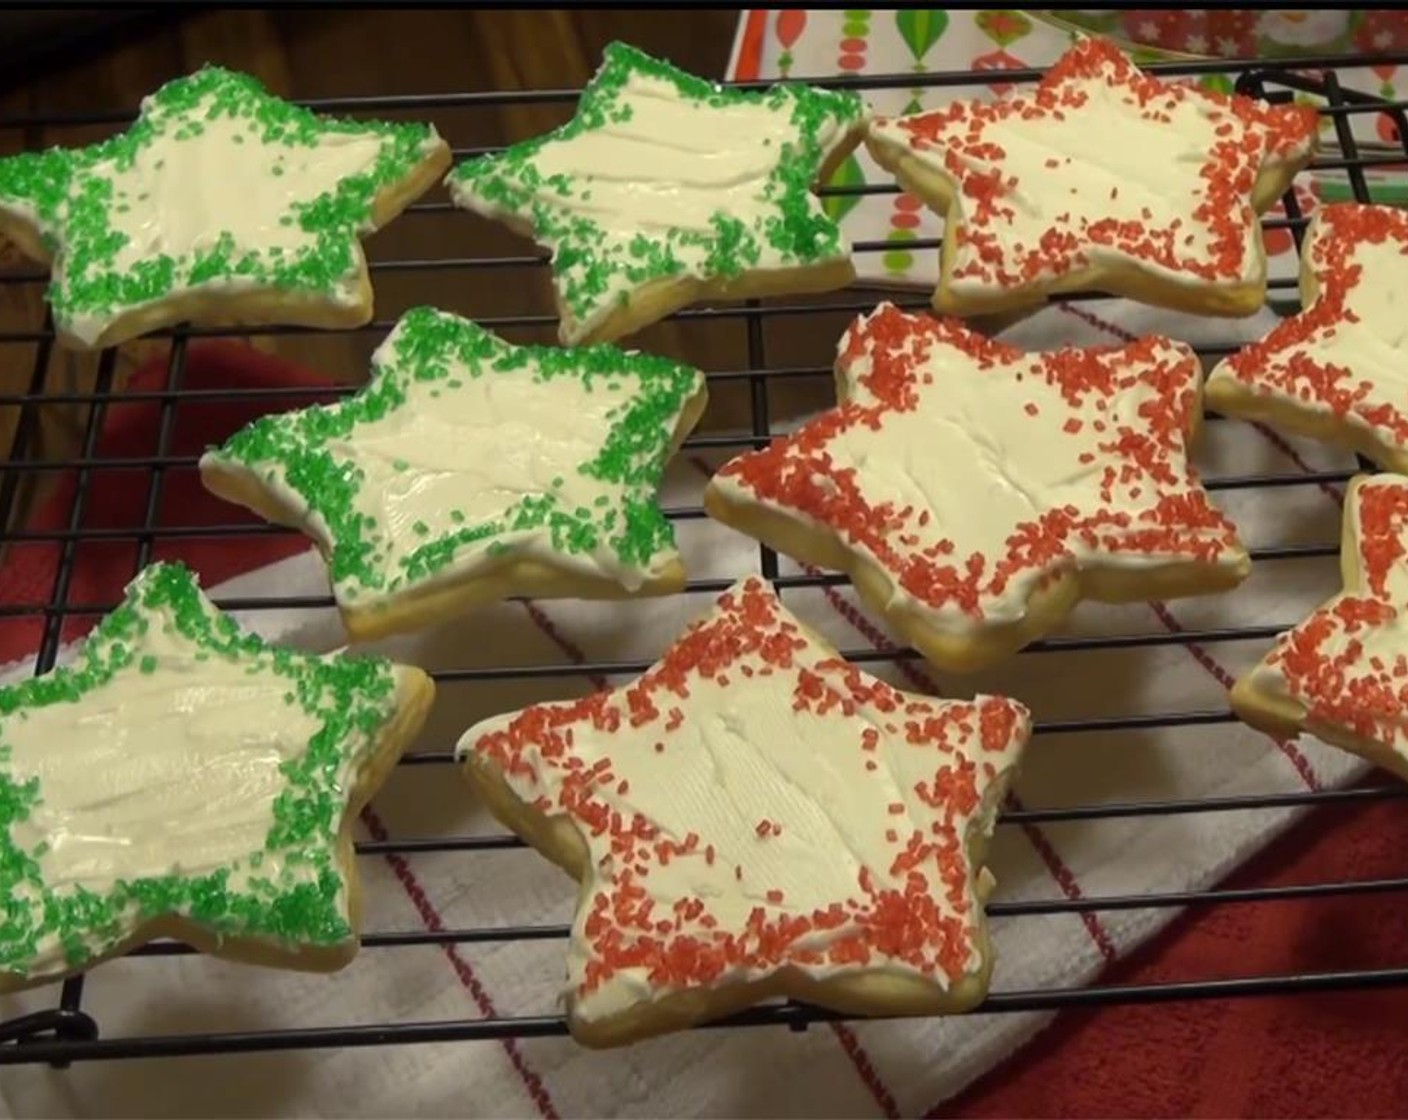 step 11 Decorate cookies with the icing. Keep a damp paper towel over the icing as you work, or it will dry up. Sprinkle them as you wish with Green and Red Colored Sugar (to taste).